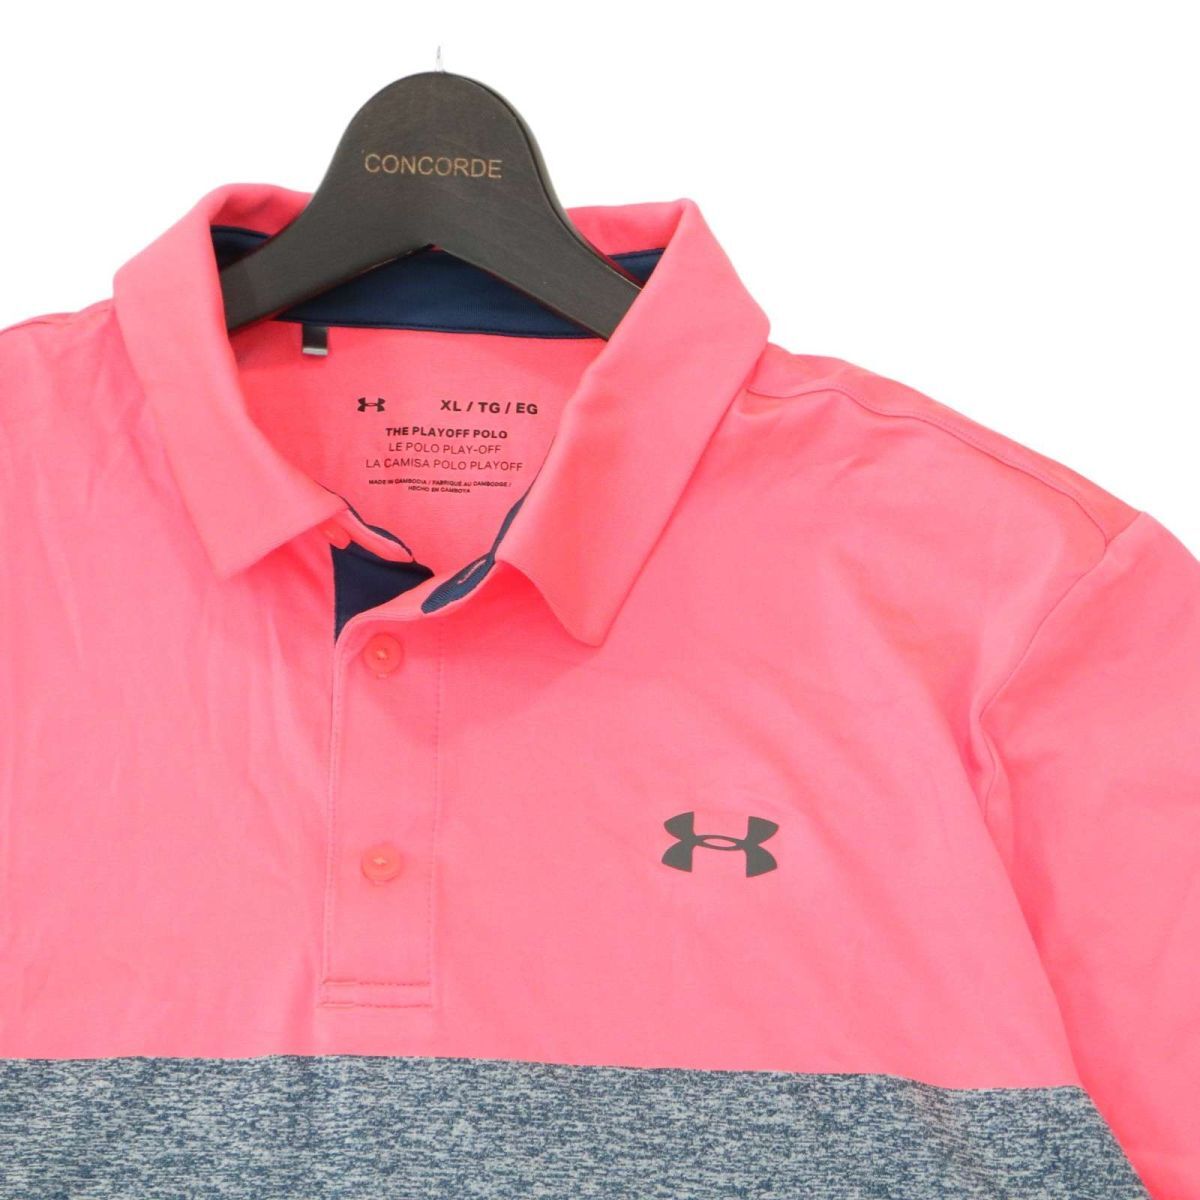 UNDER ARMOUR アンダーアーマー 春夏 THE PLAYOFF POLO★ 半袖 ボーダー ポロシャツ Sz.XL　メンズ 大きいサイズ ゴルフ　A4T05143_5#A_画像2